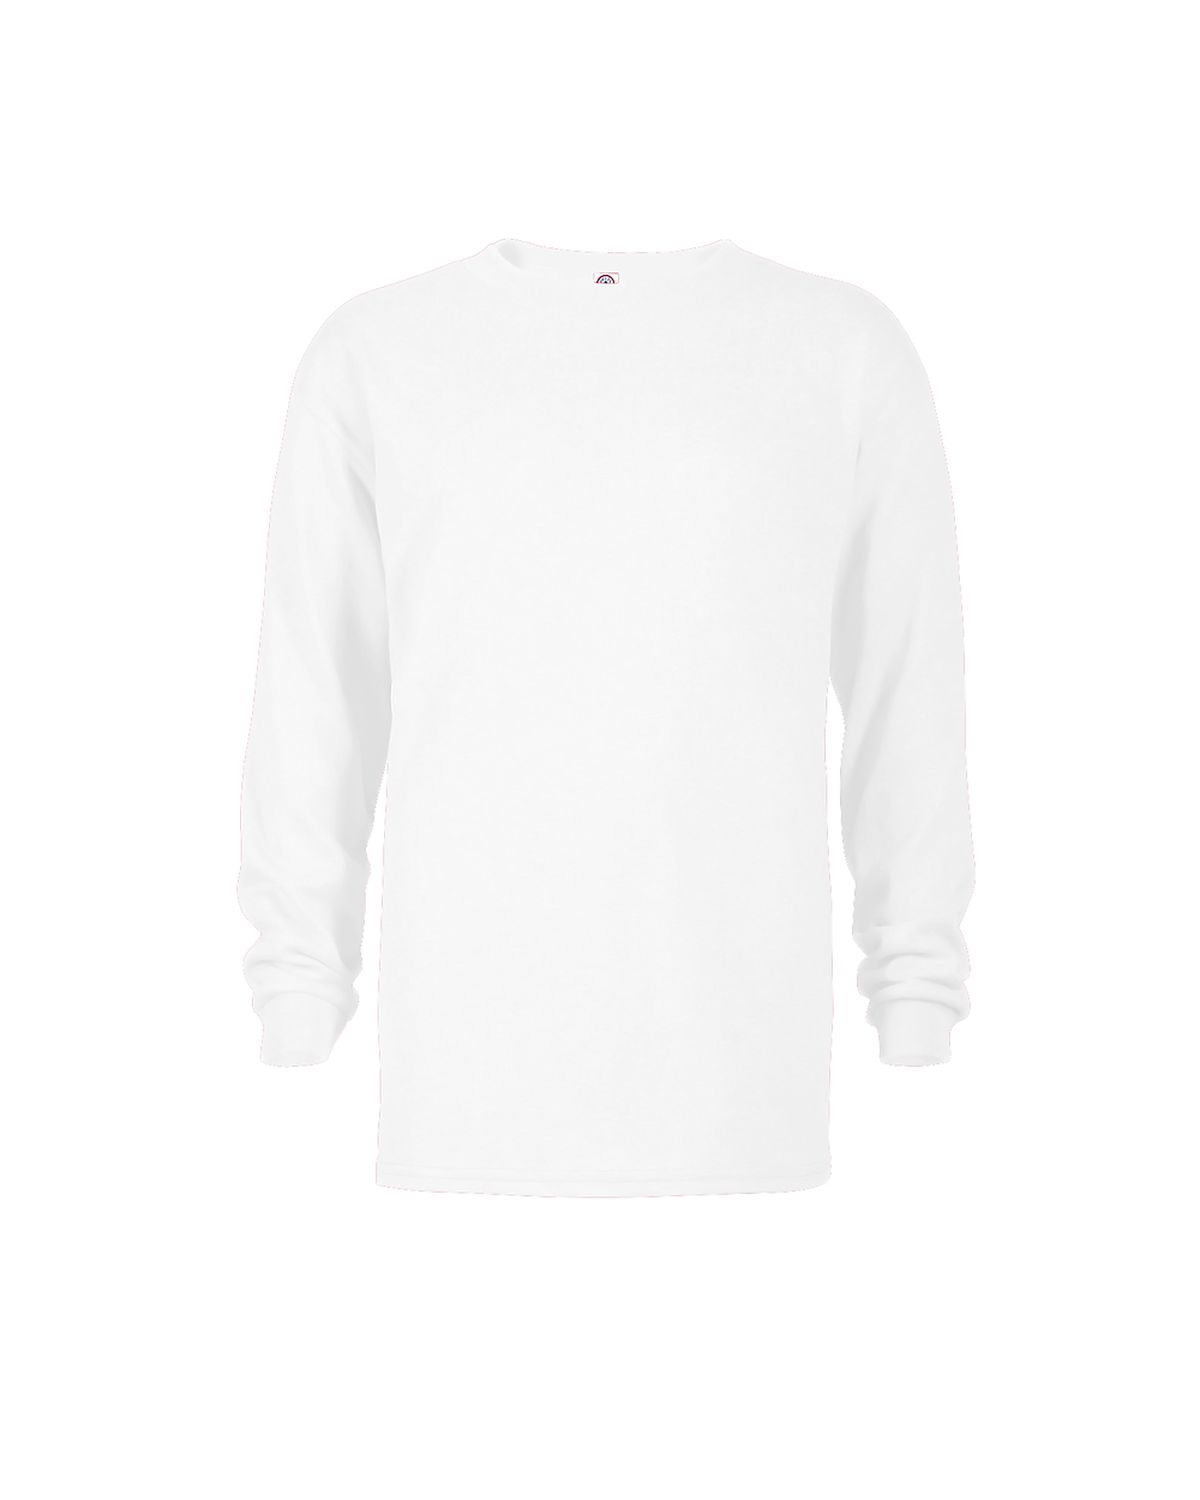 'Delta 64900L Pro Weight Youth 5.2 oz Retail Fit Long Sleeve Tee'